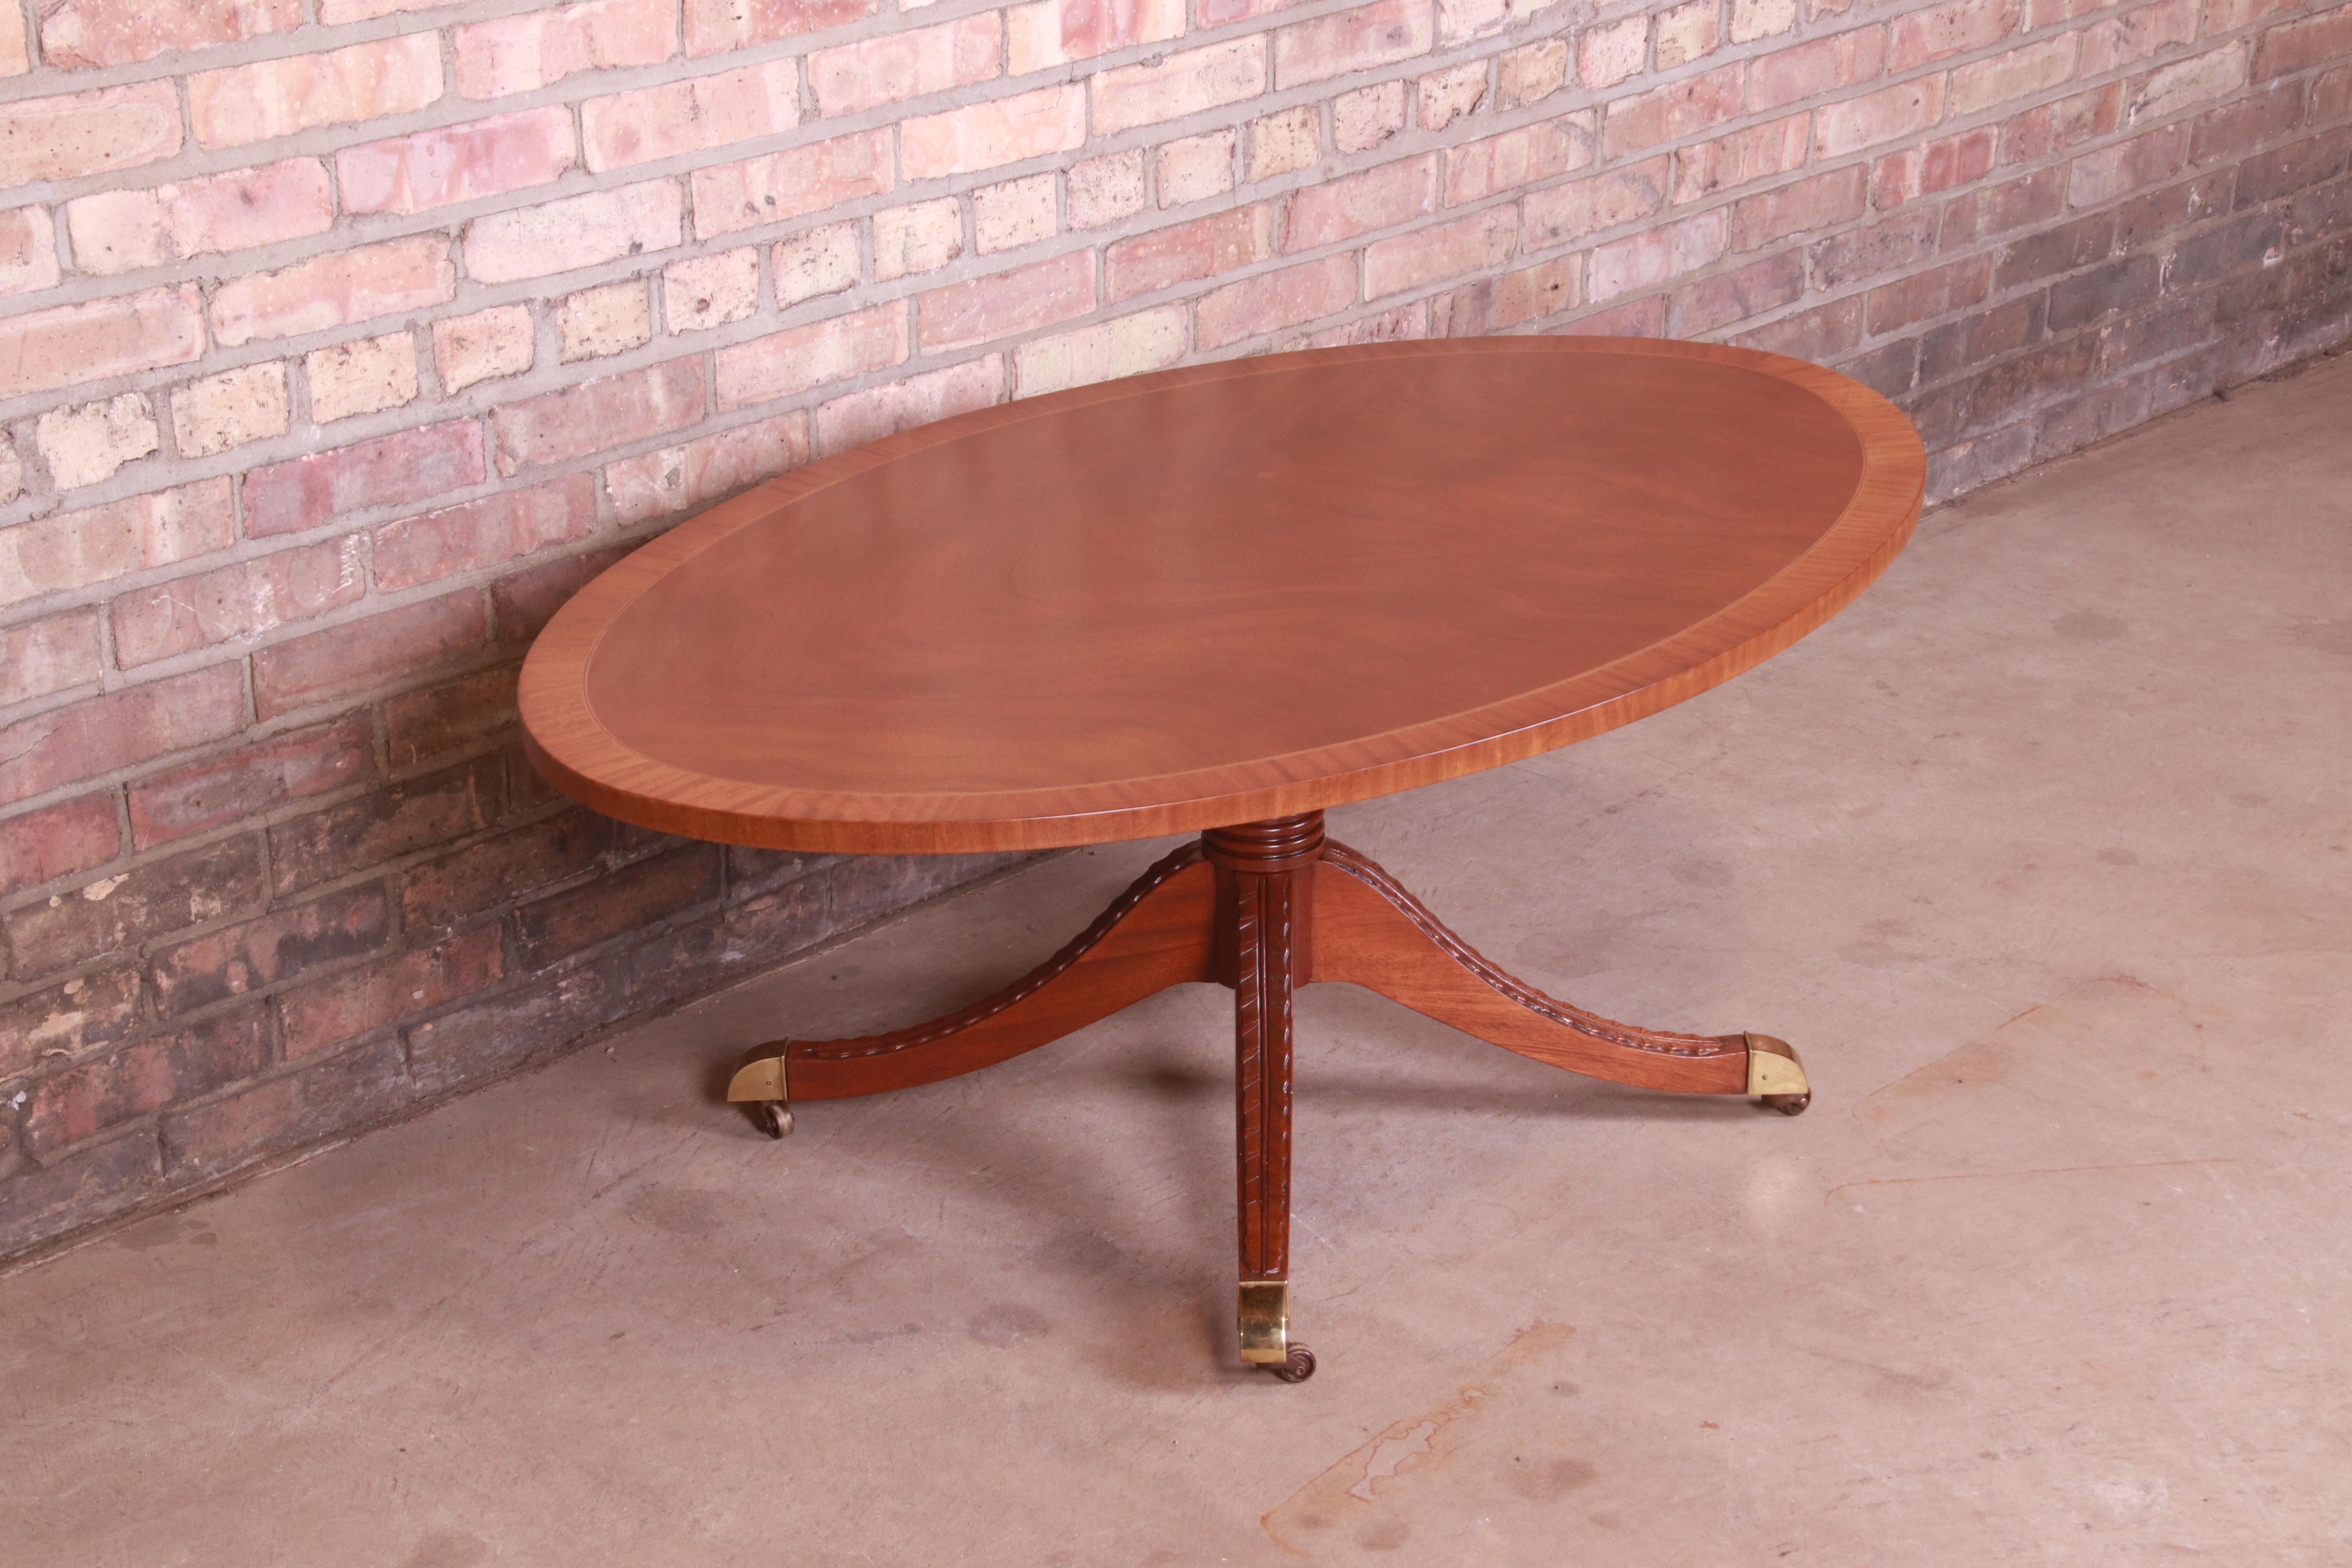 20th Century Kindel Furniture Regency Banded Mahogany Pedestal Coffee Table, Newly Refinished